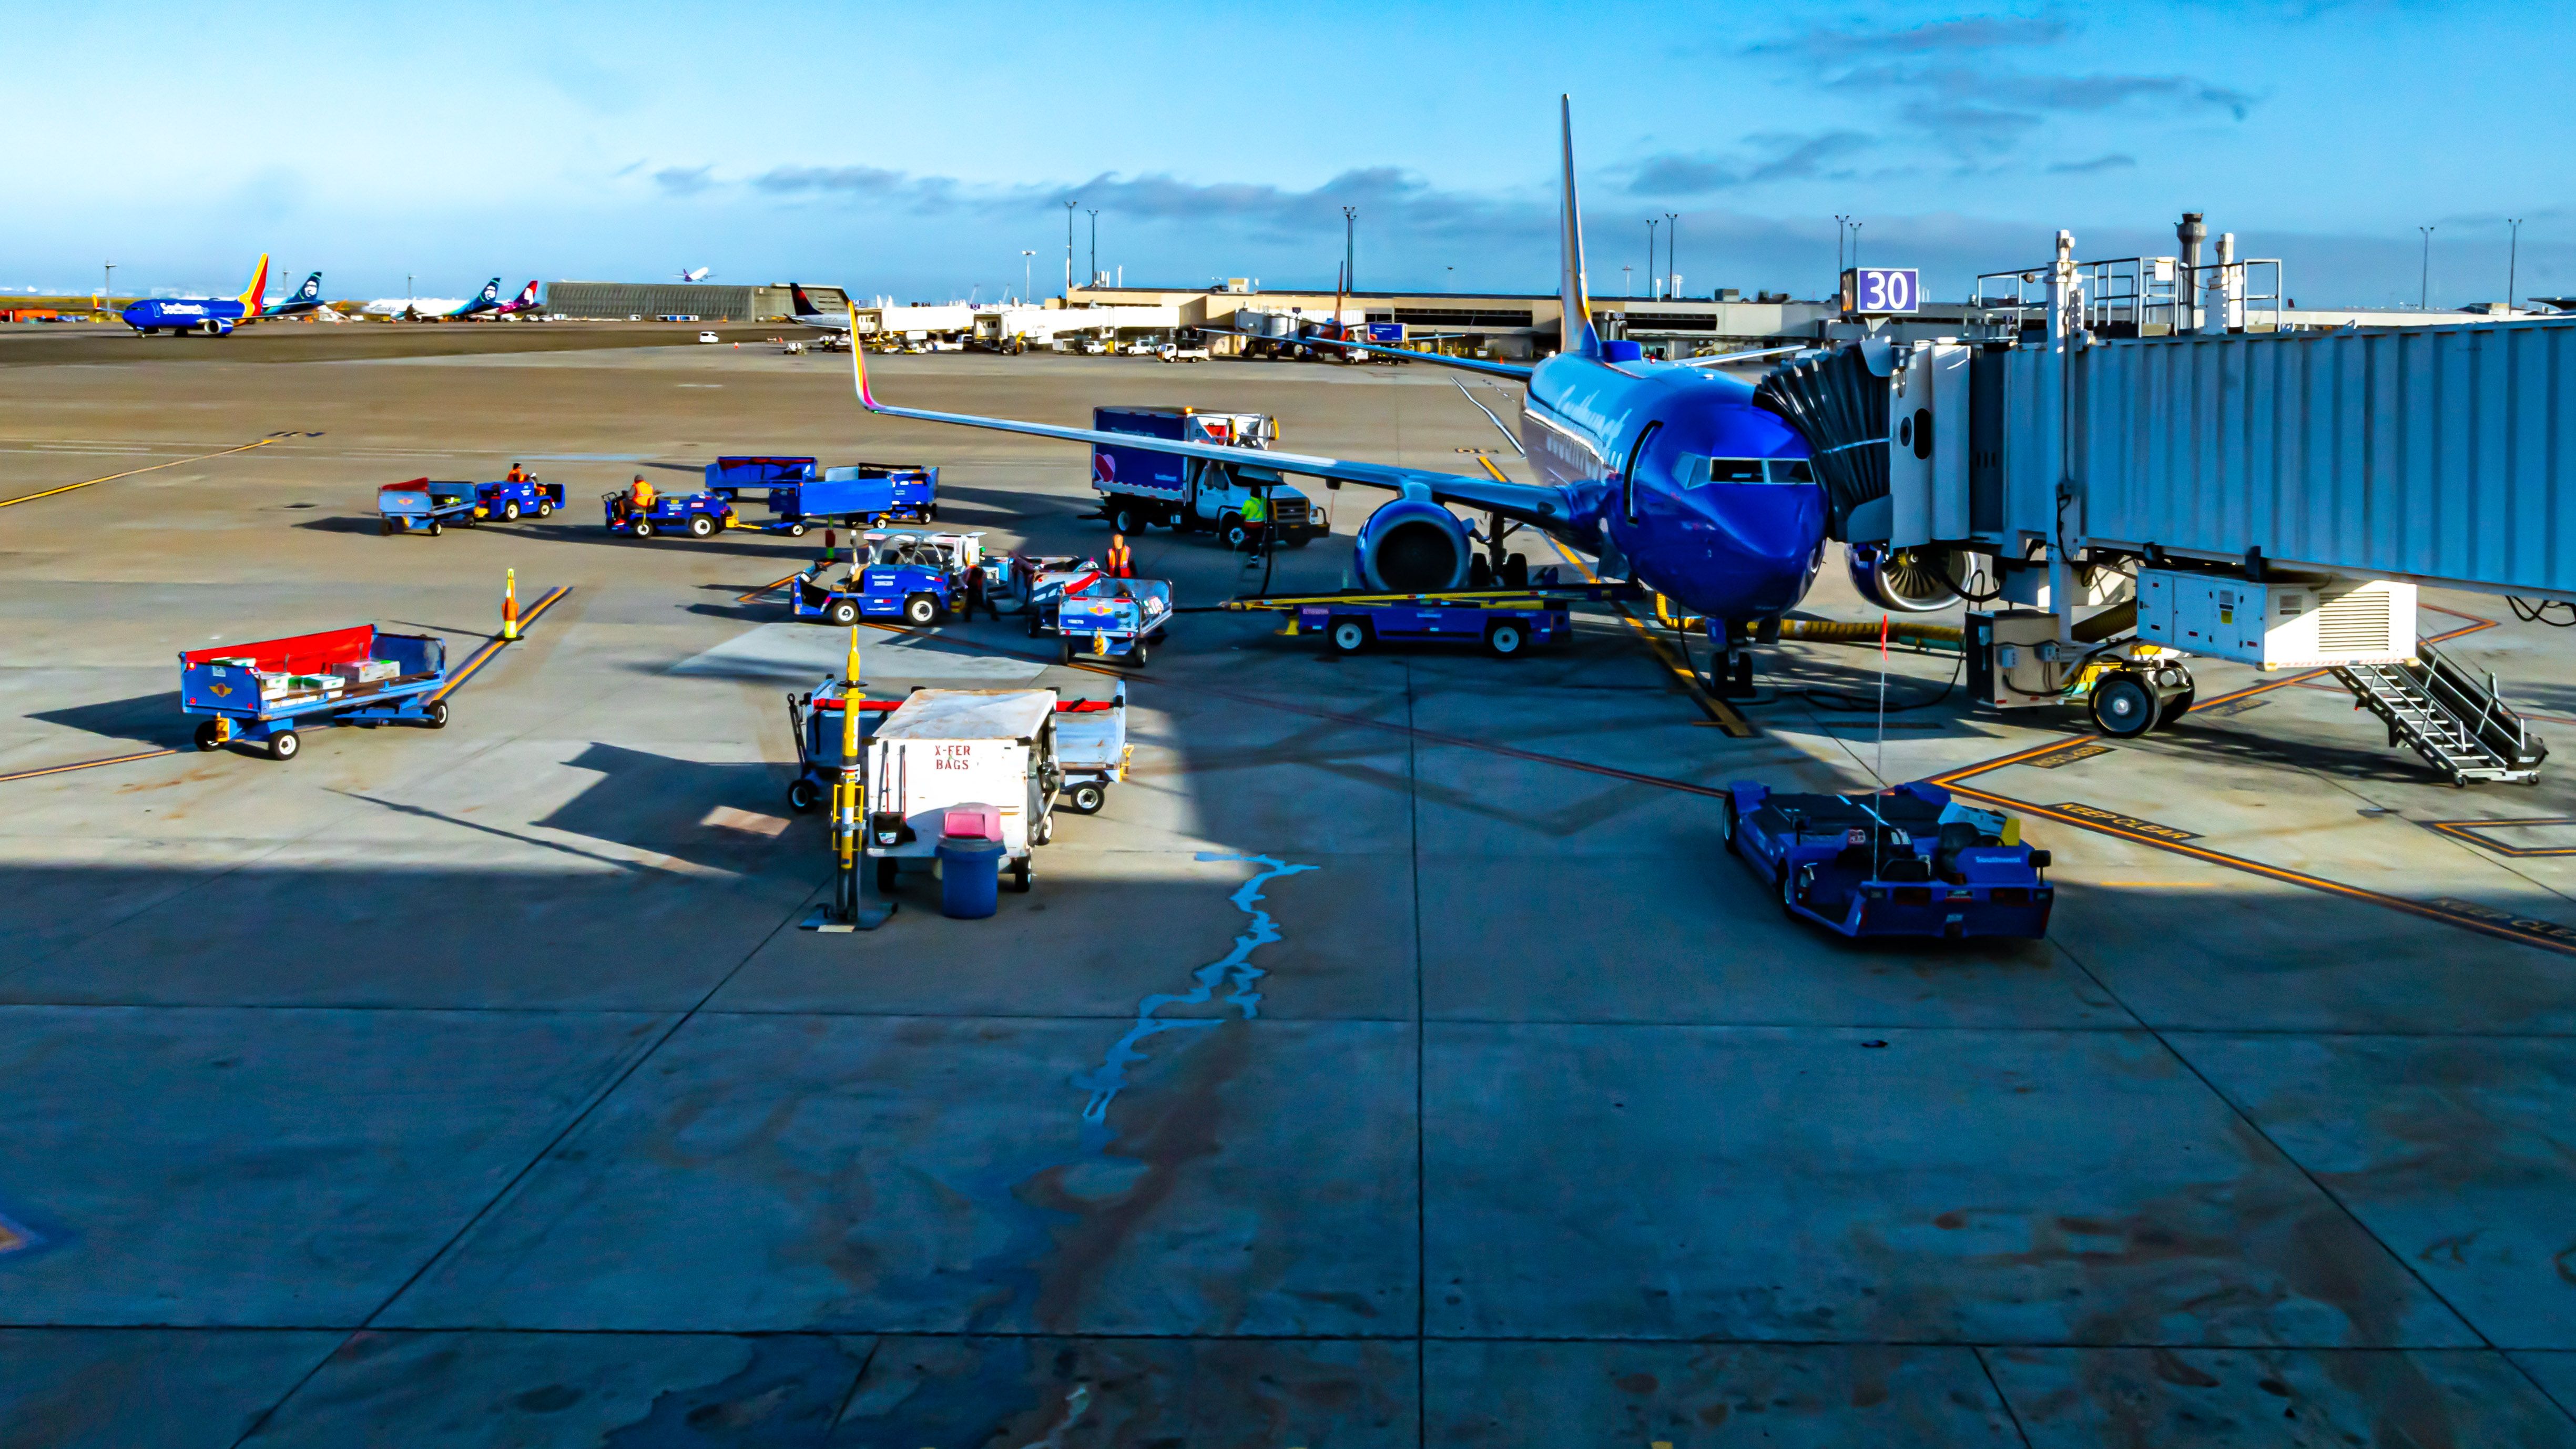 A Southwest Airlines Boeing 737-700 parked at an airport gate surrounded by luggage and other service vehicles.